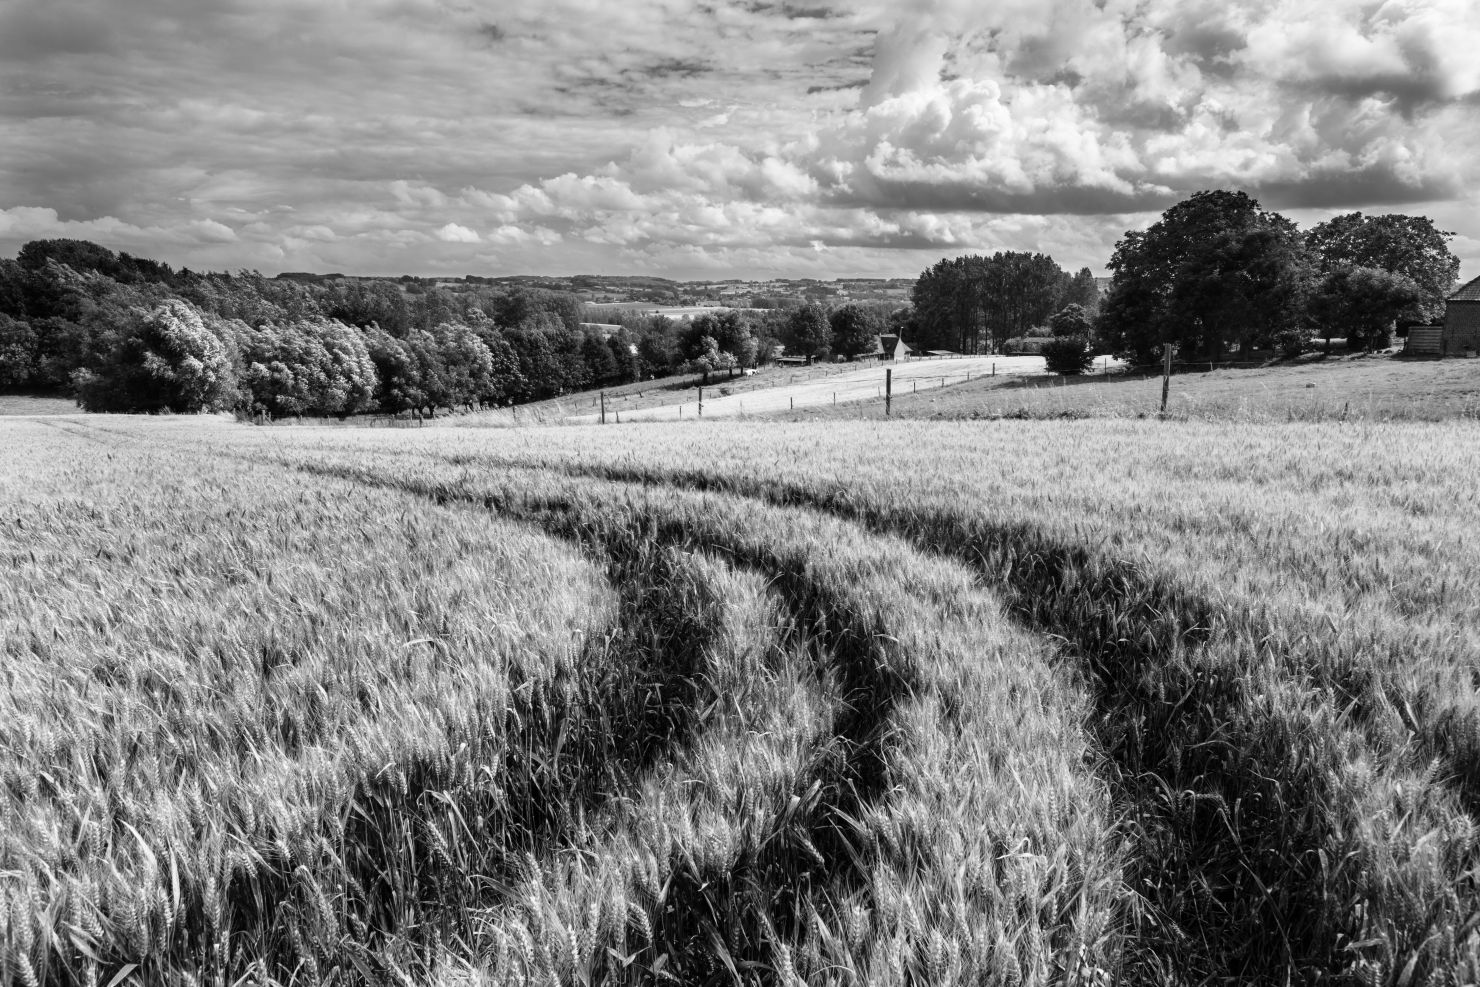 Tracks in a wheat field in the Flemish Ardennes